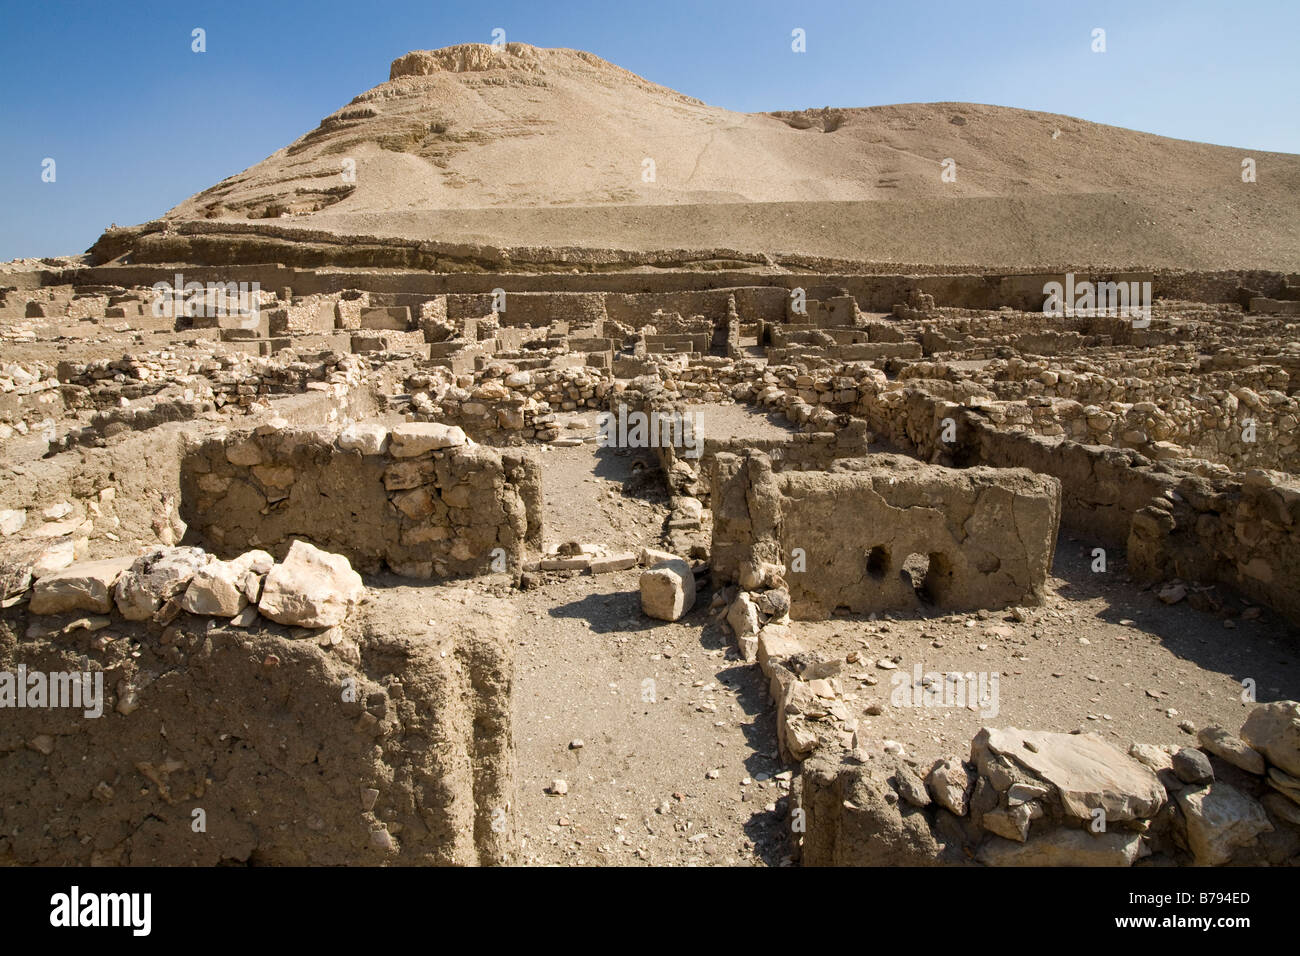 Deir el Medina: The Workers' Village on the West Bank Luxor, Egypt Stock Photo